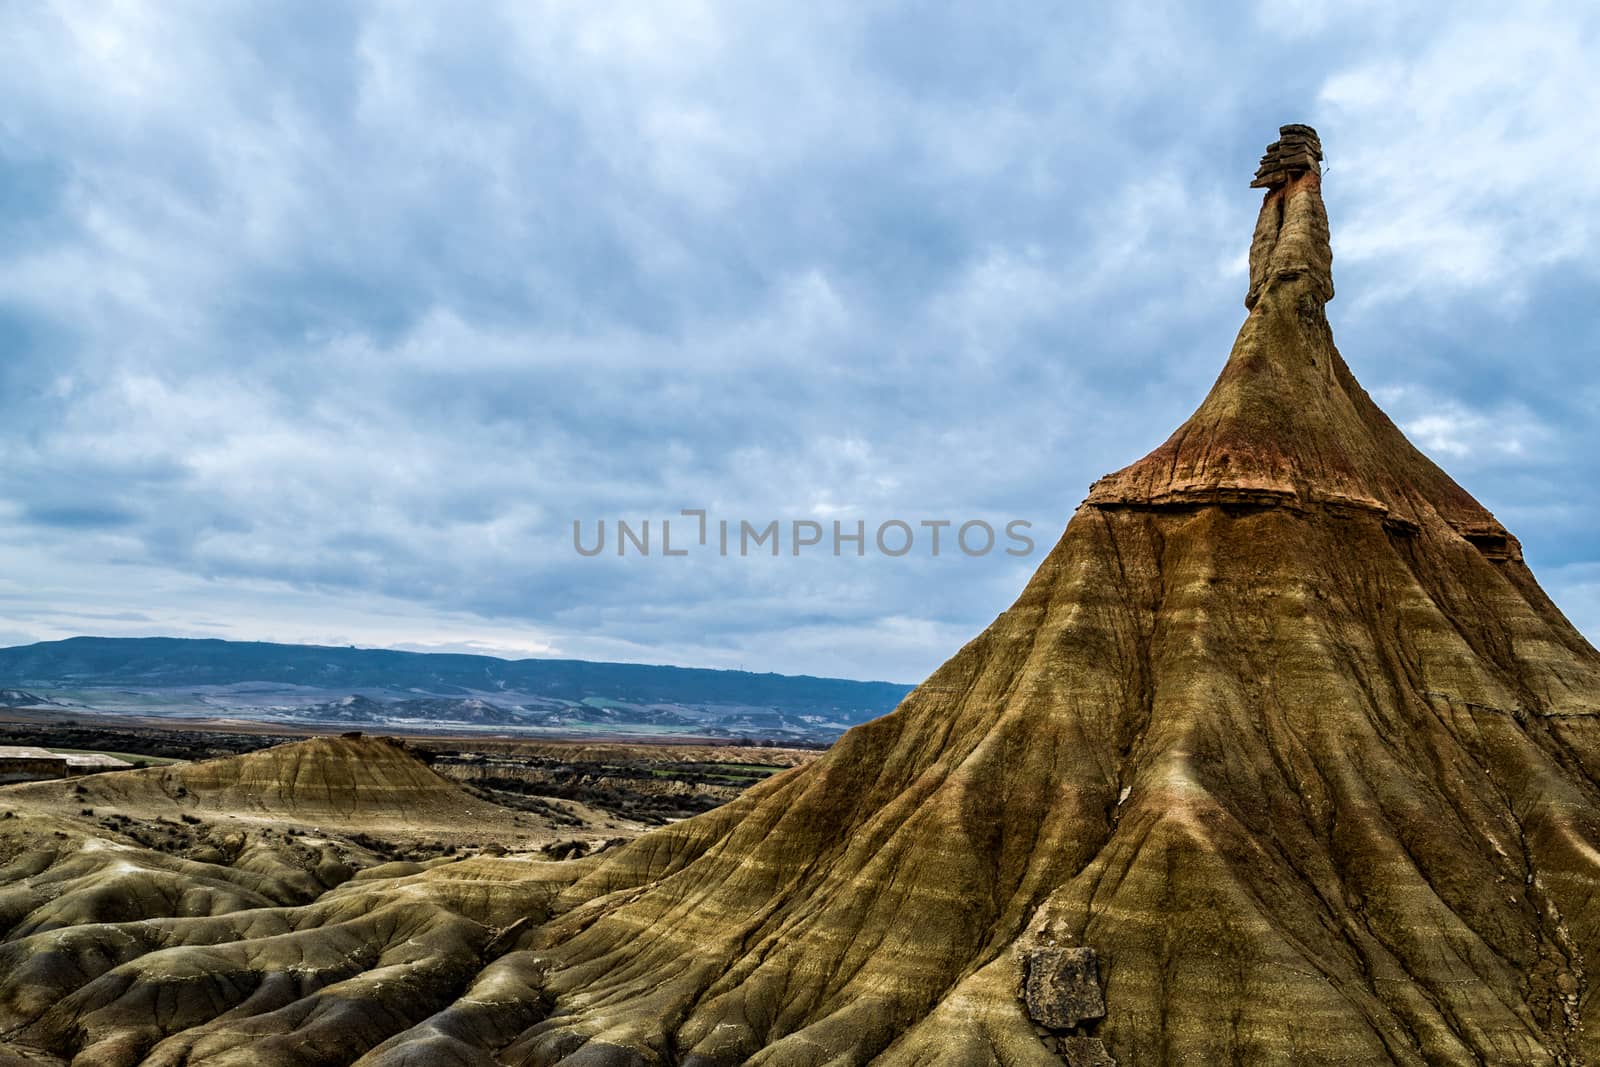 Bardenas reales recently became famous after season 6 of the show Game of Thrones was filmed there